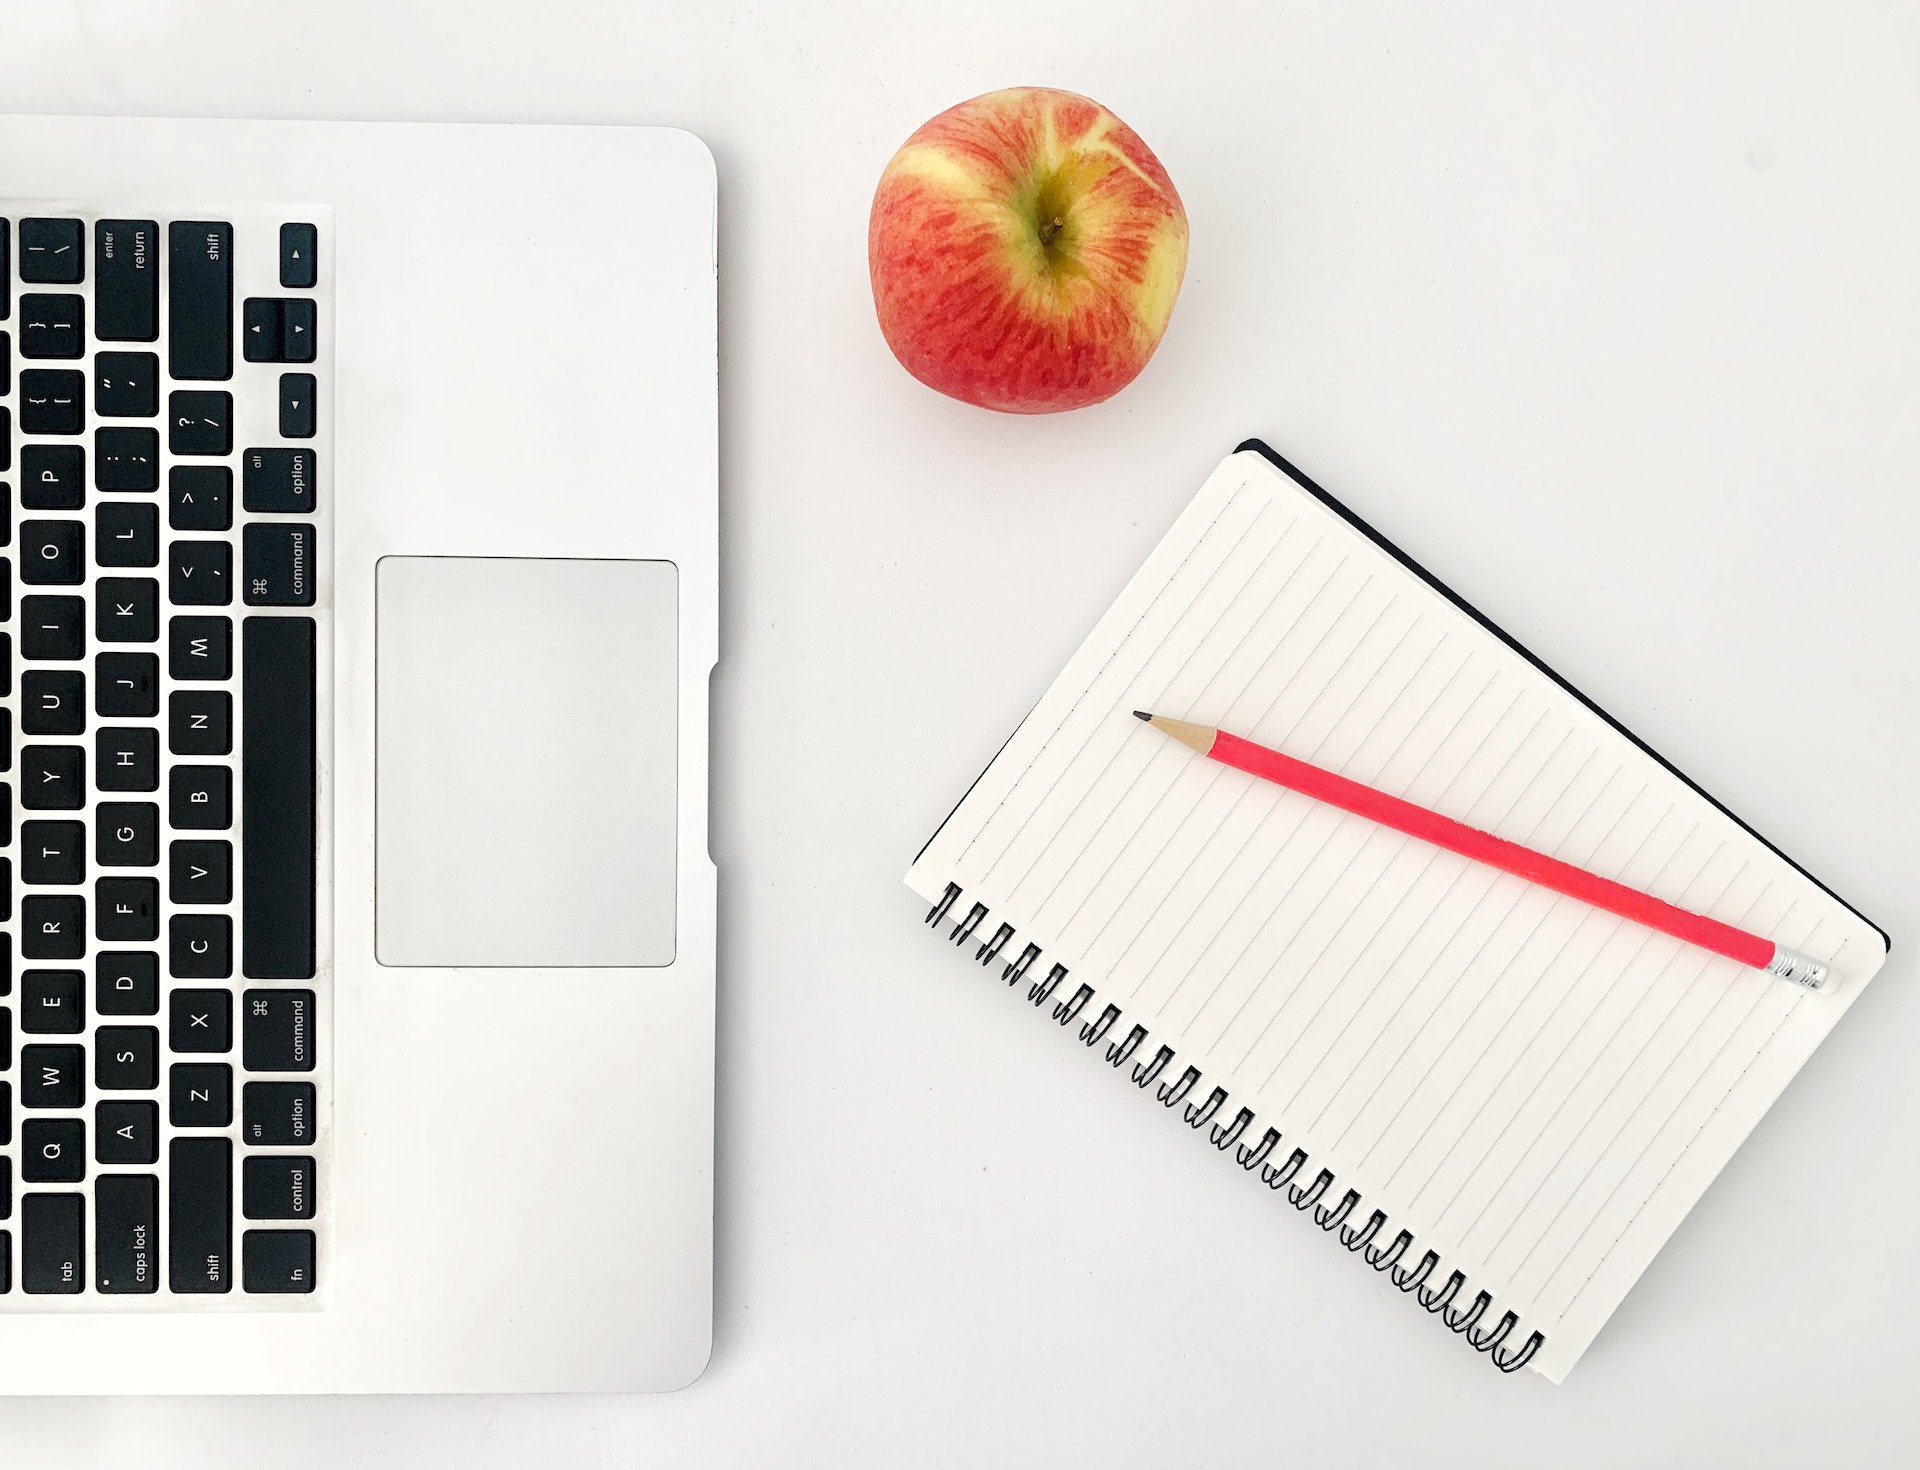 Laptop with notebook and apple in minimalist setting